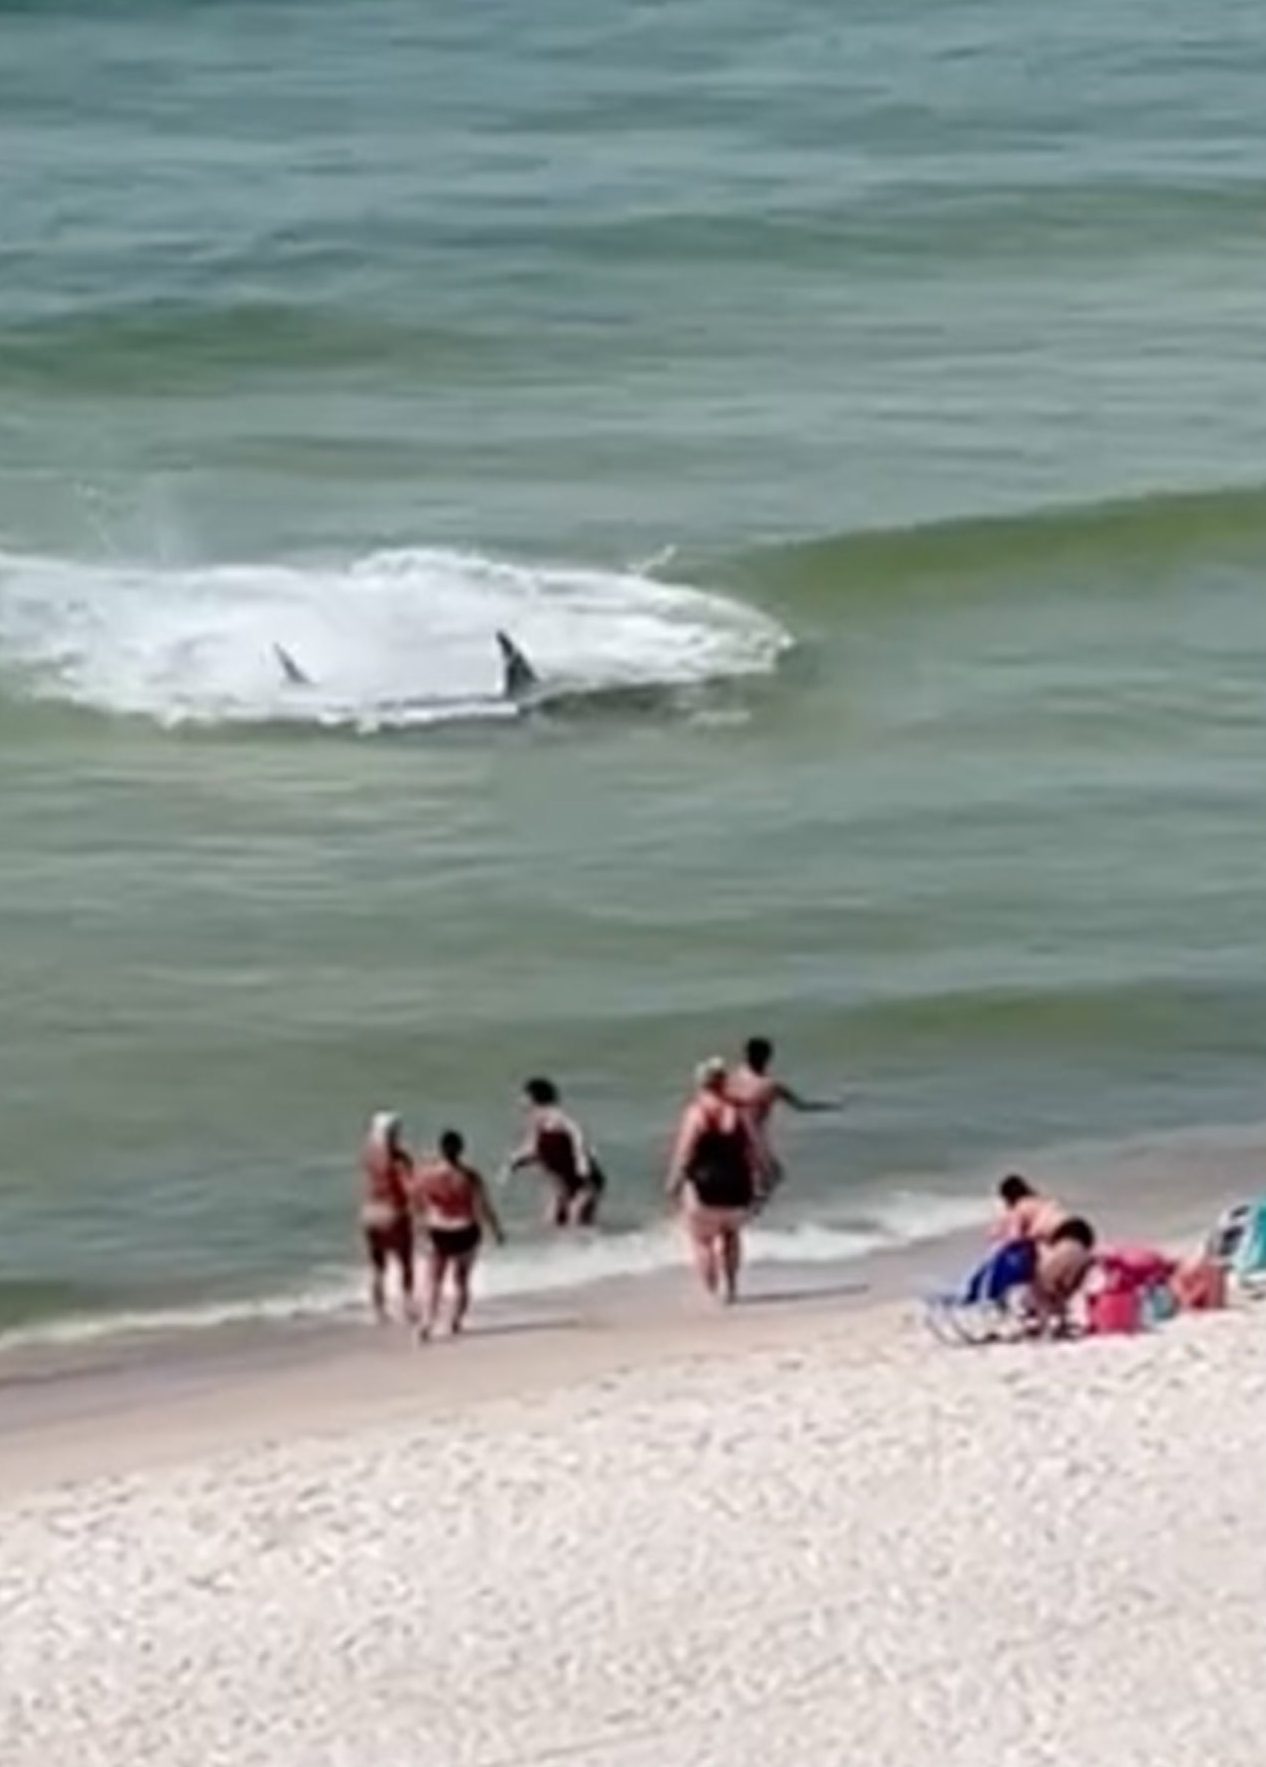 Peek told Storyful that she had spotted at least 15 sharks circling off the waters of Orange Beach on Monday, but the one in the video was the biggest of the lot.